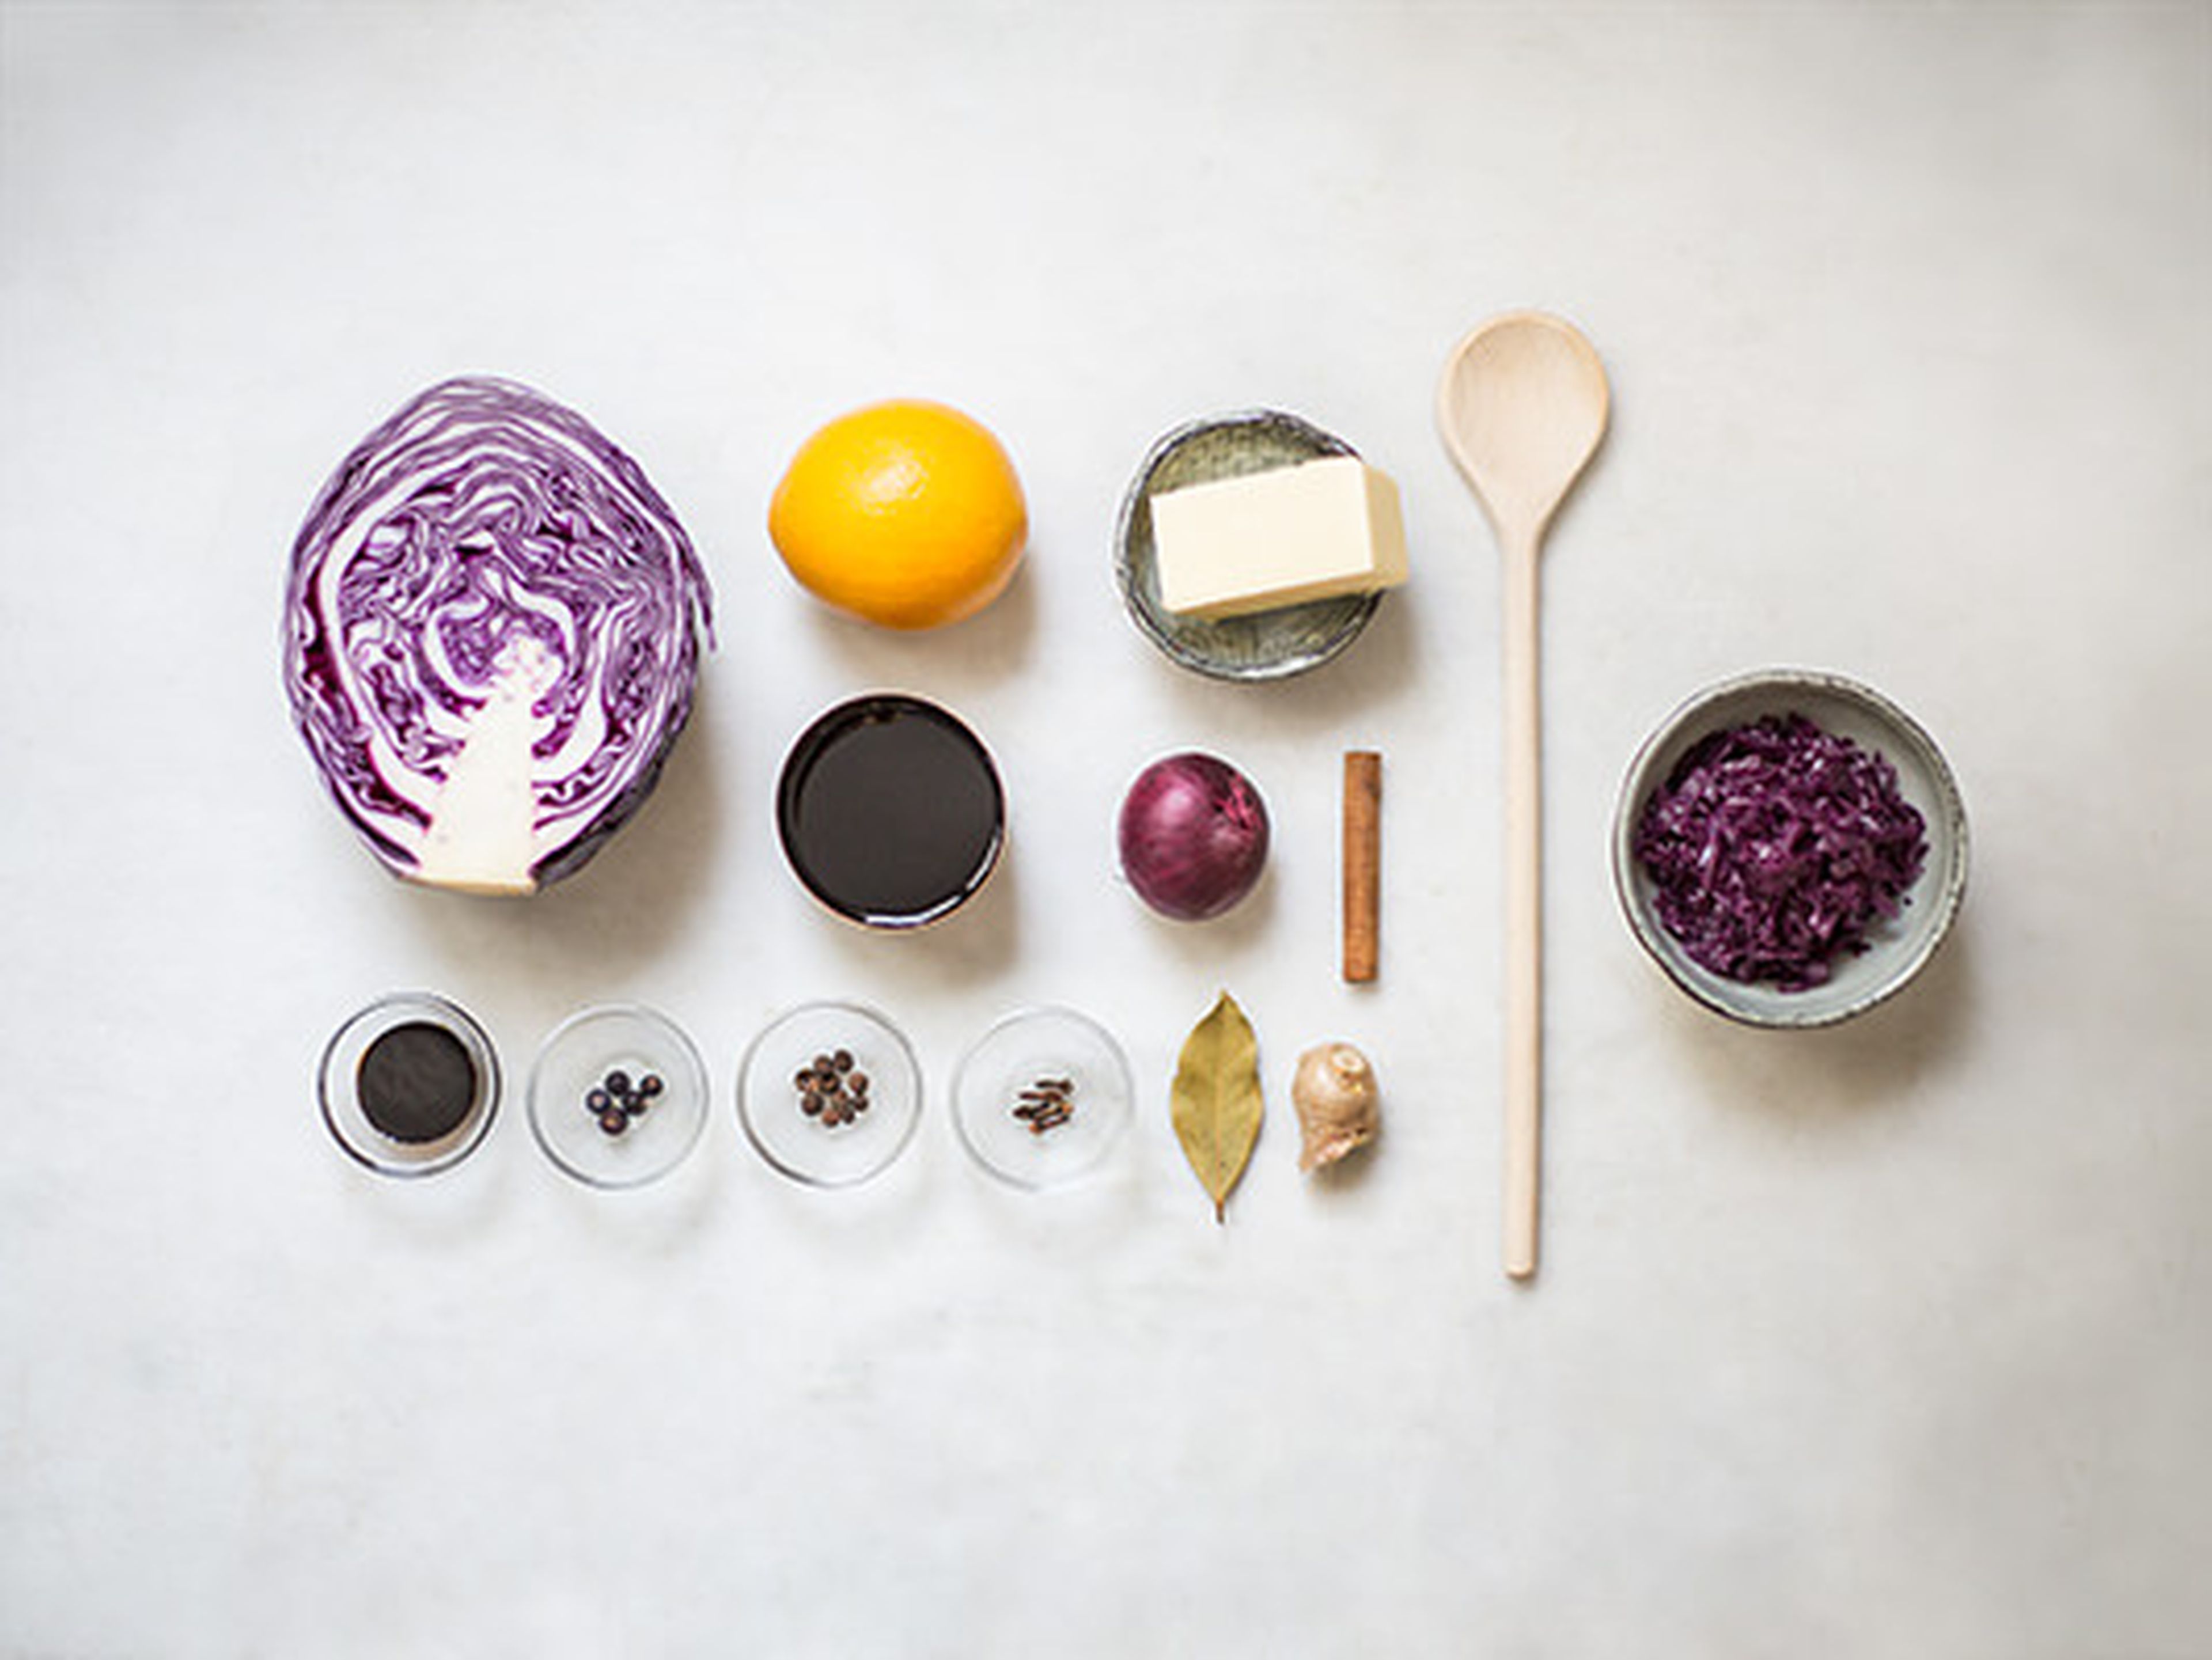 Homemade red cabbage